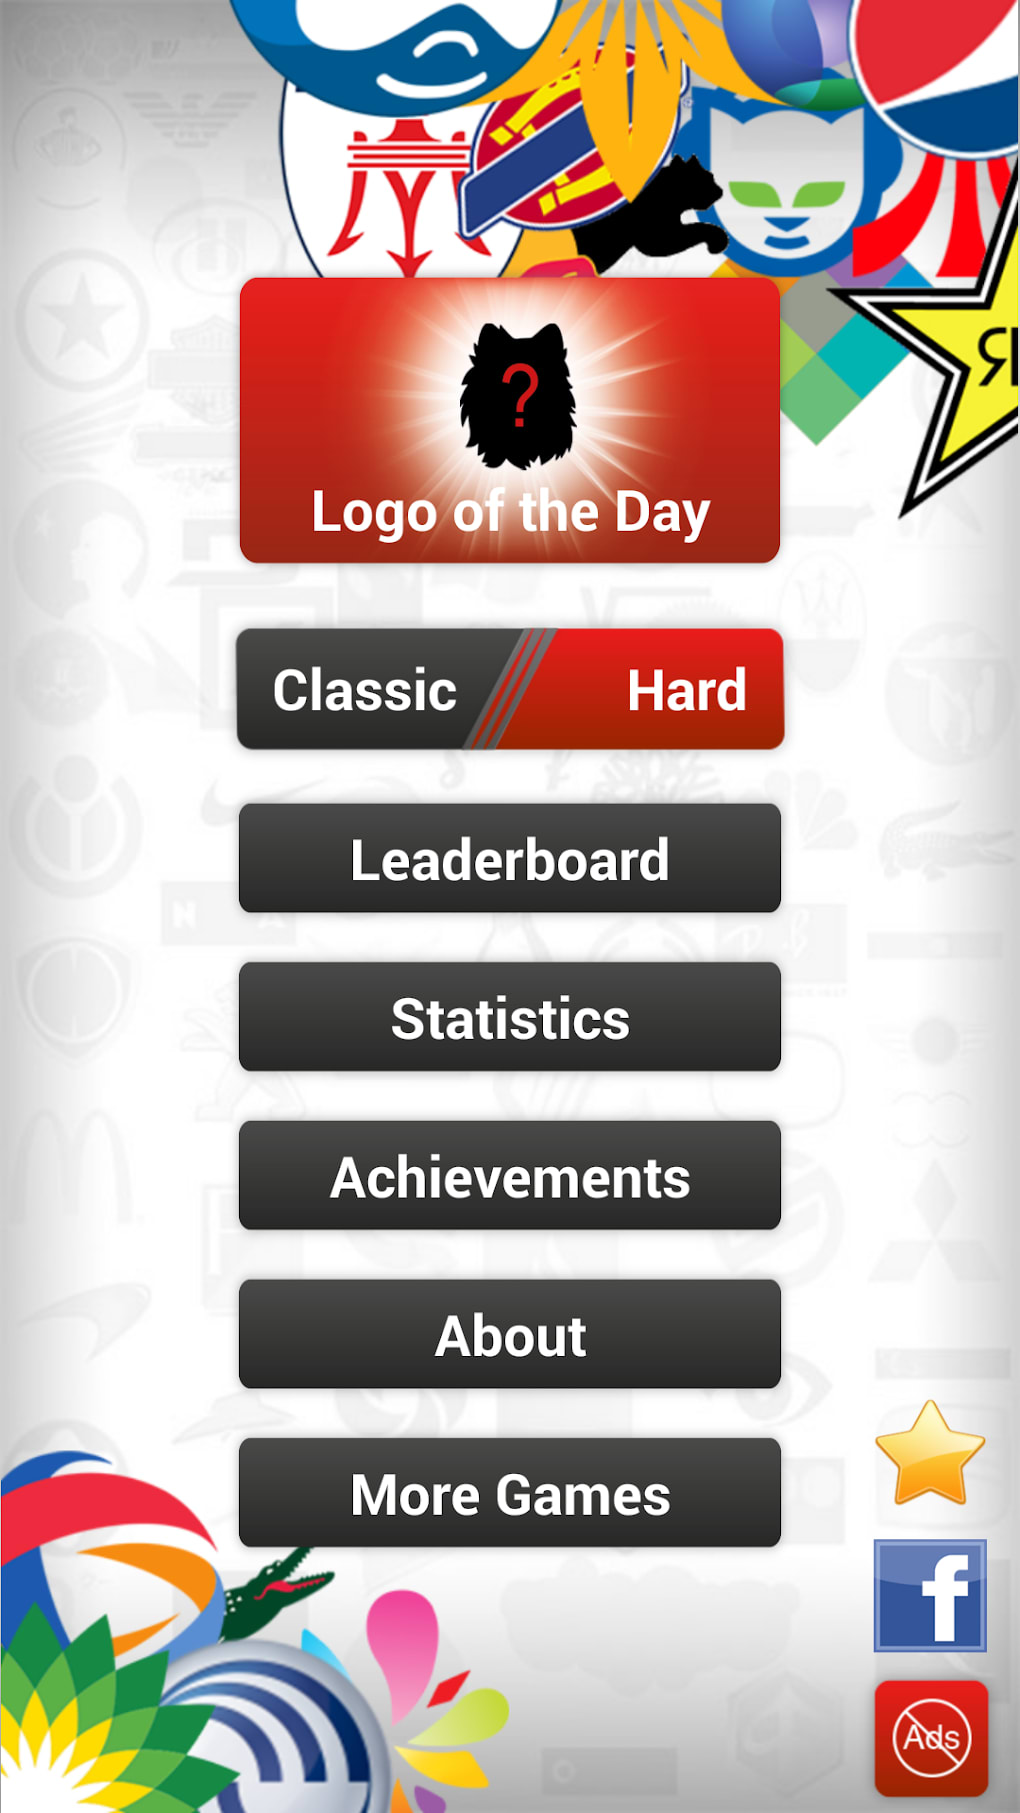 Logo quiz androidcrowd level 4 answers